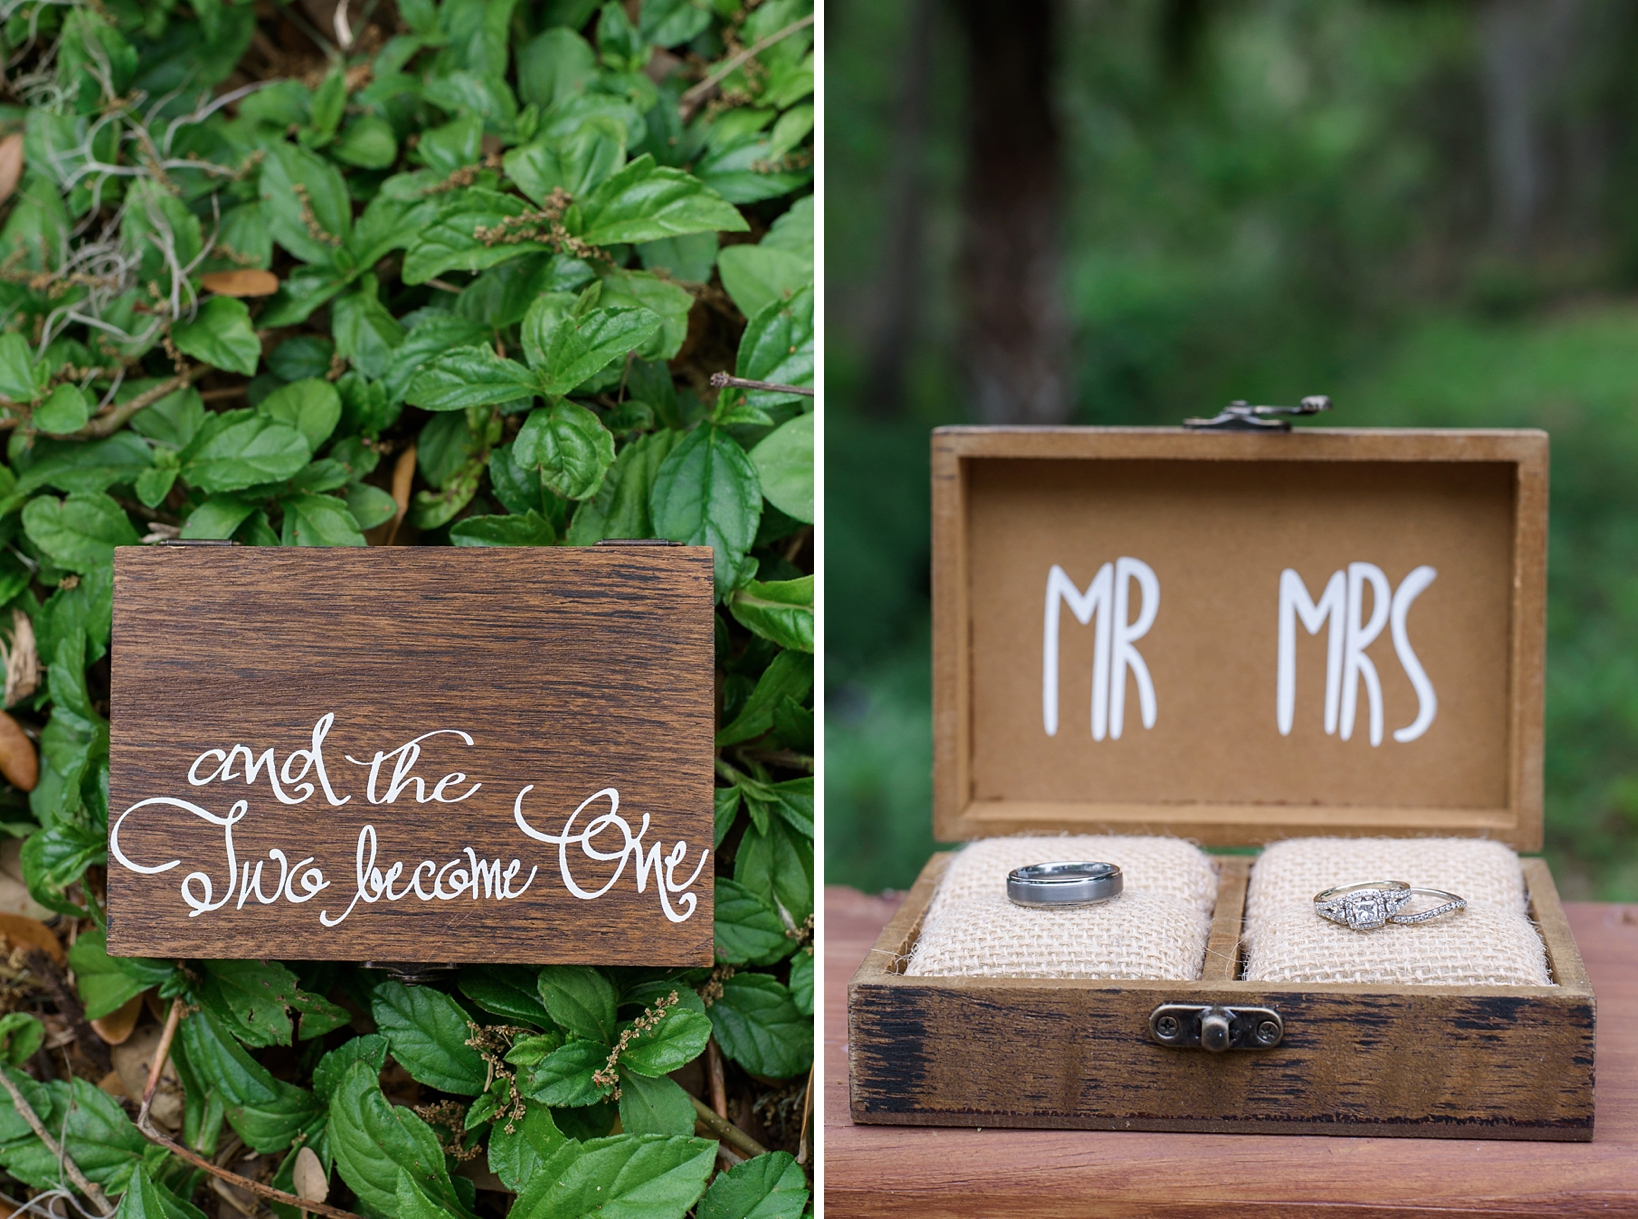 Rustic wedding signs and ring box with wedding bands